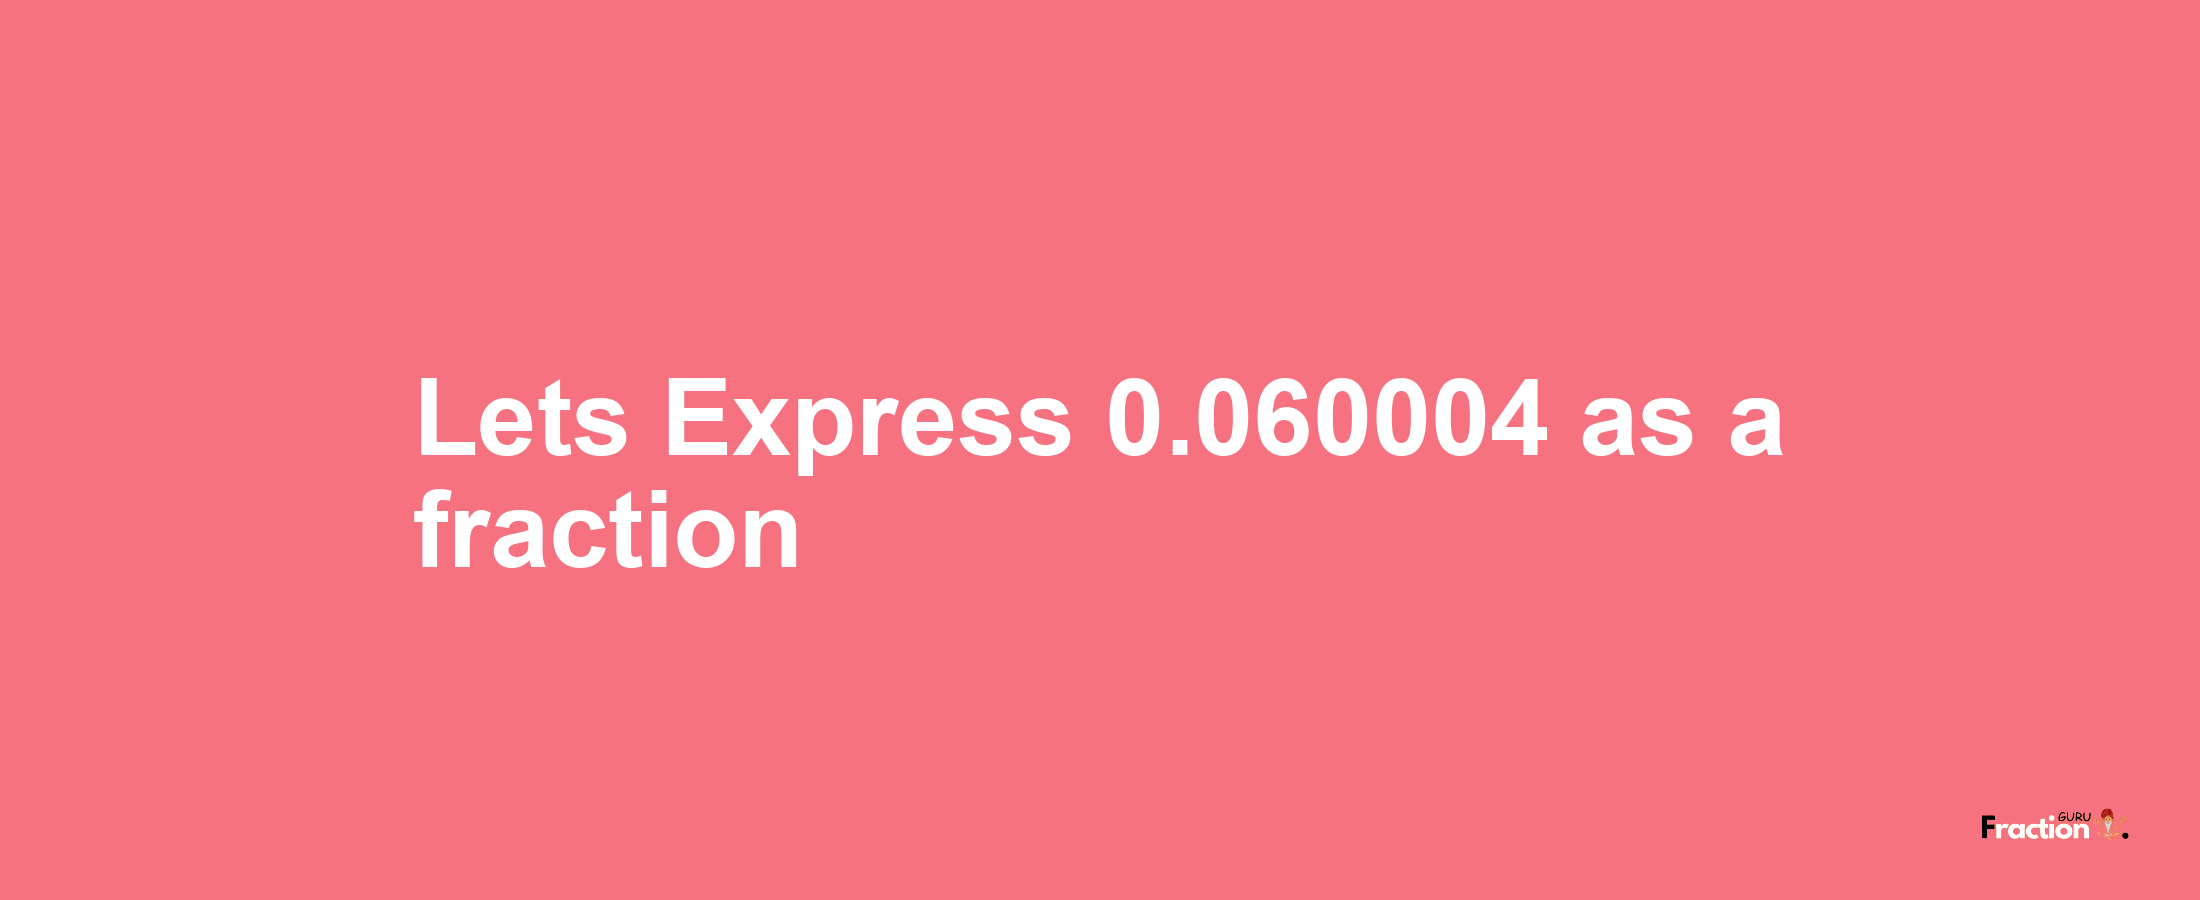 Lets Express 0.060004 as afraction